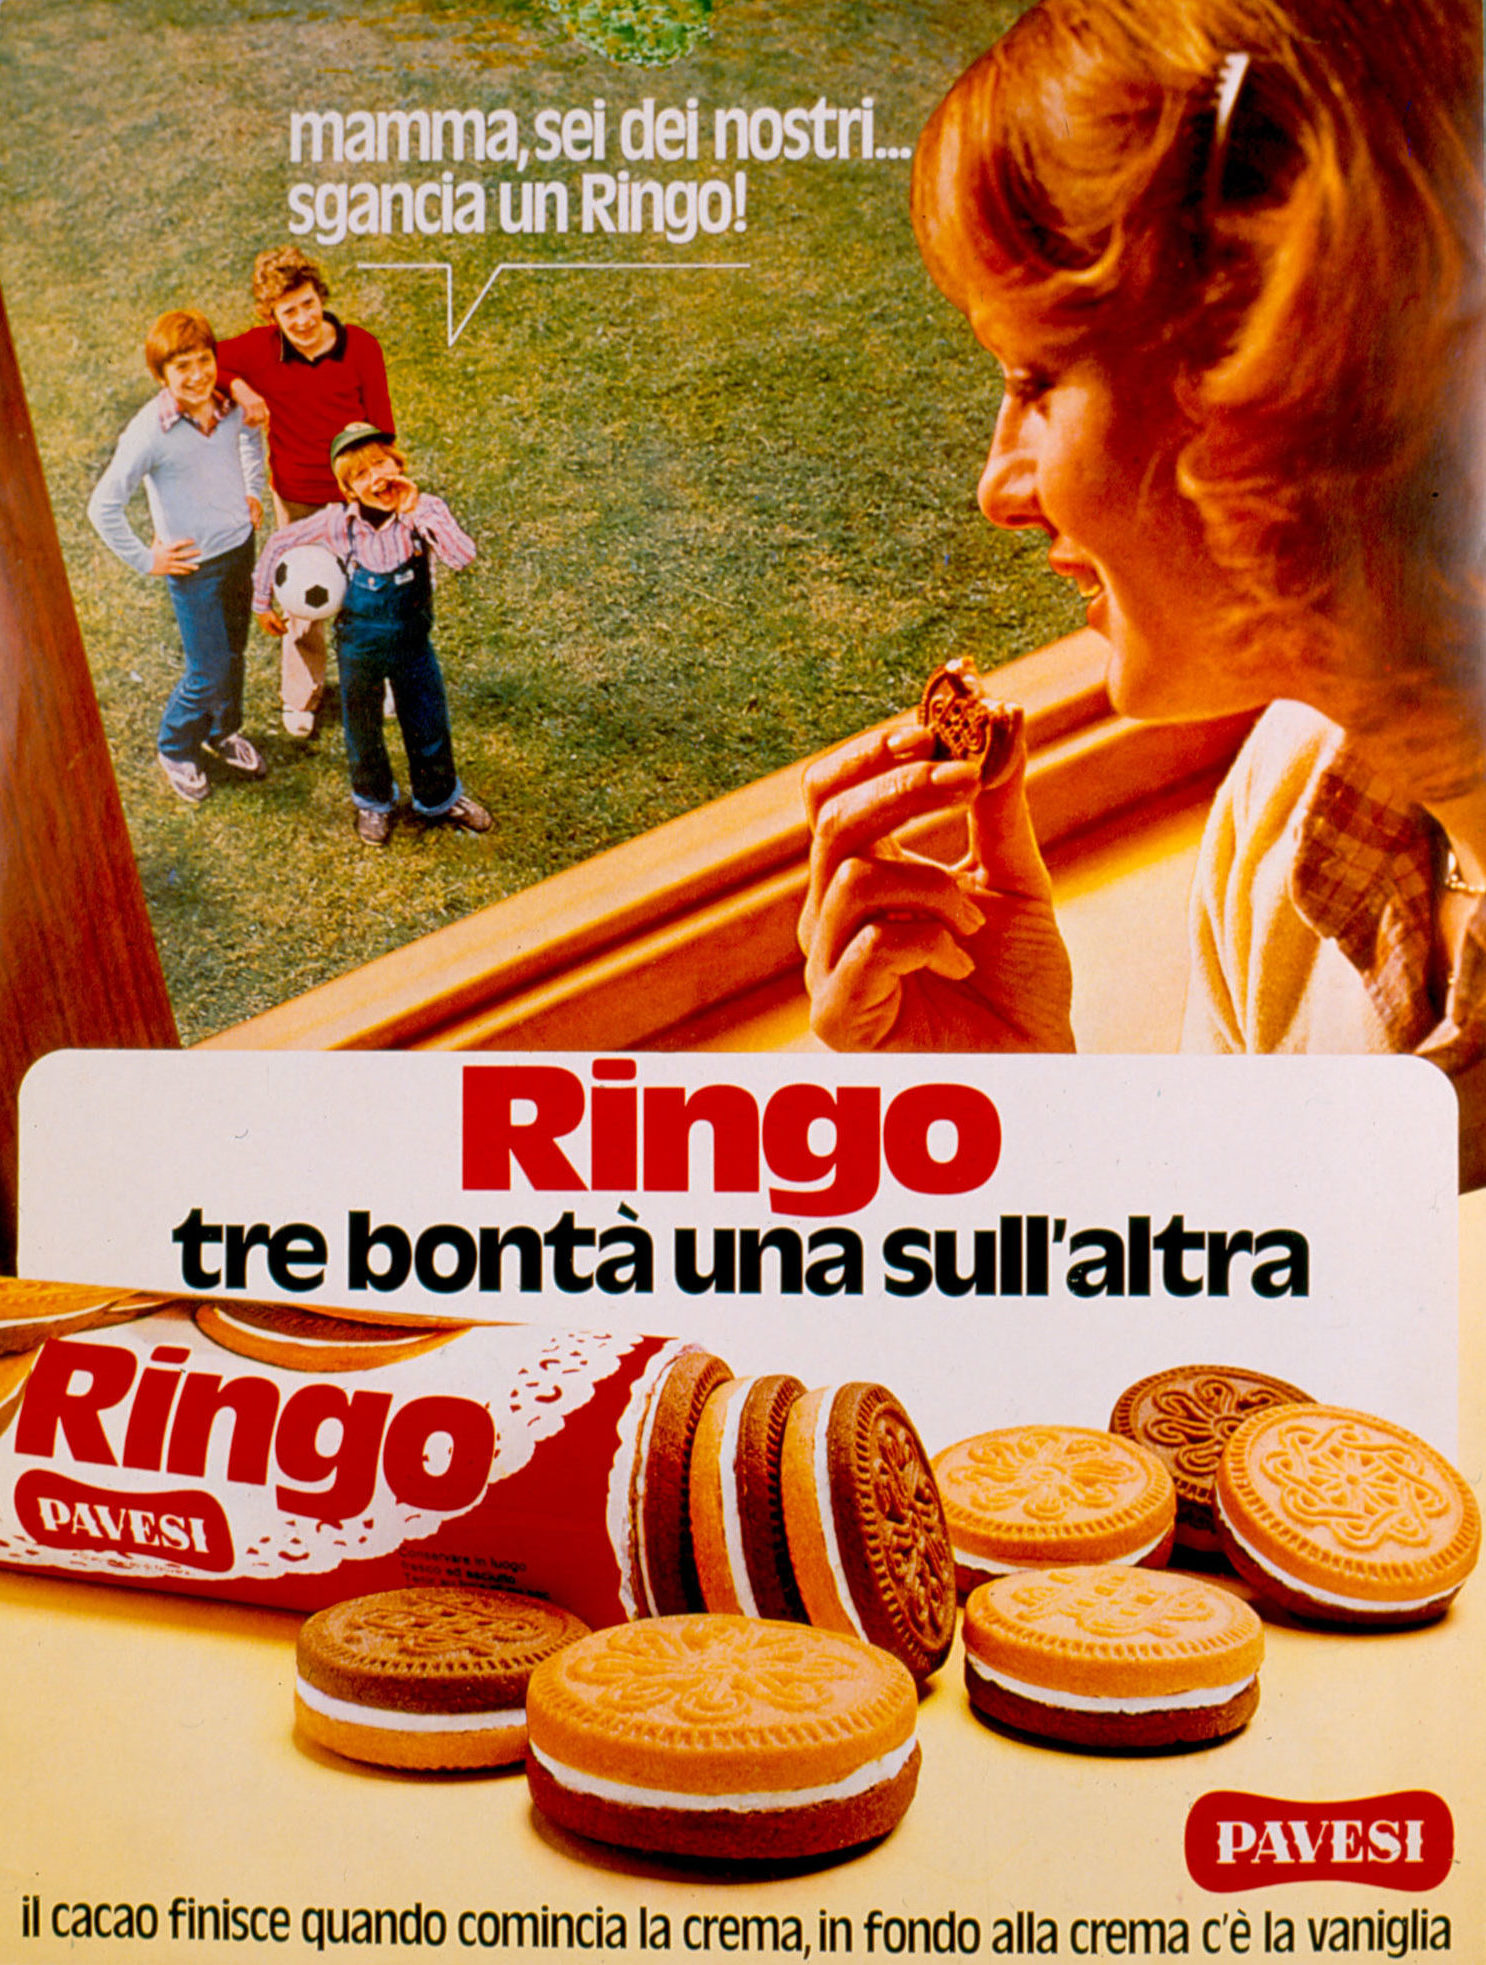 Press advertising - Tre bontà una sull'altra, 1978 [Three pieces of goodness one above the other, 1978]